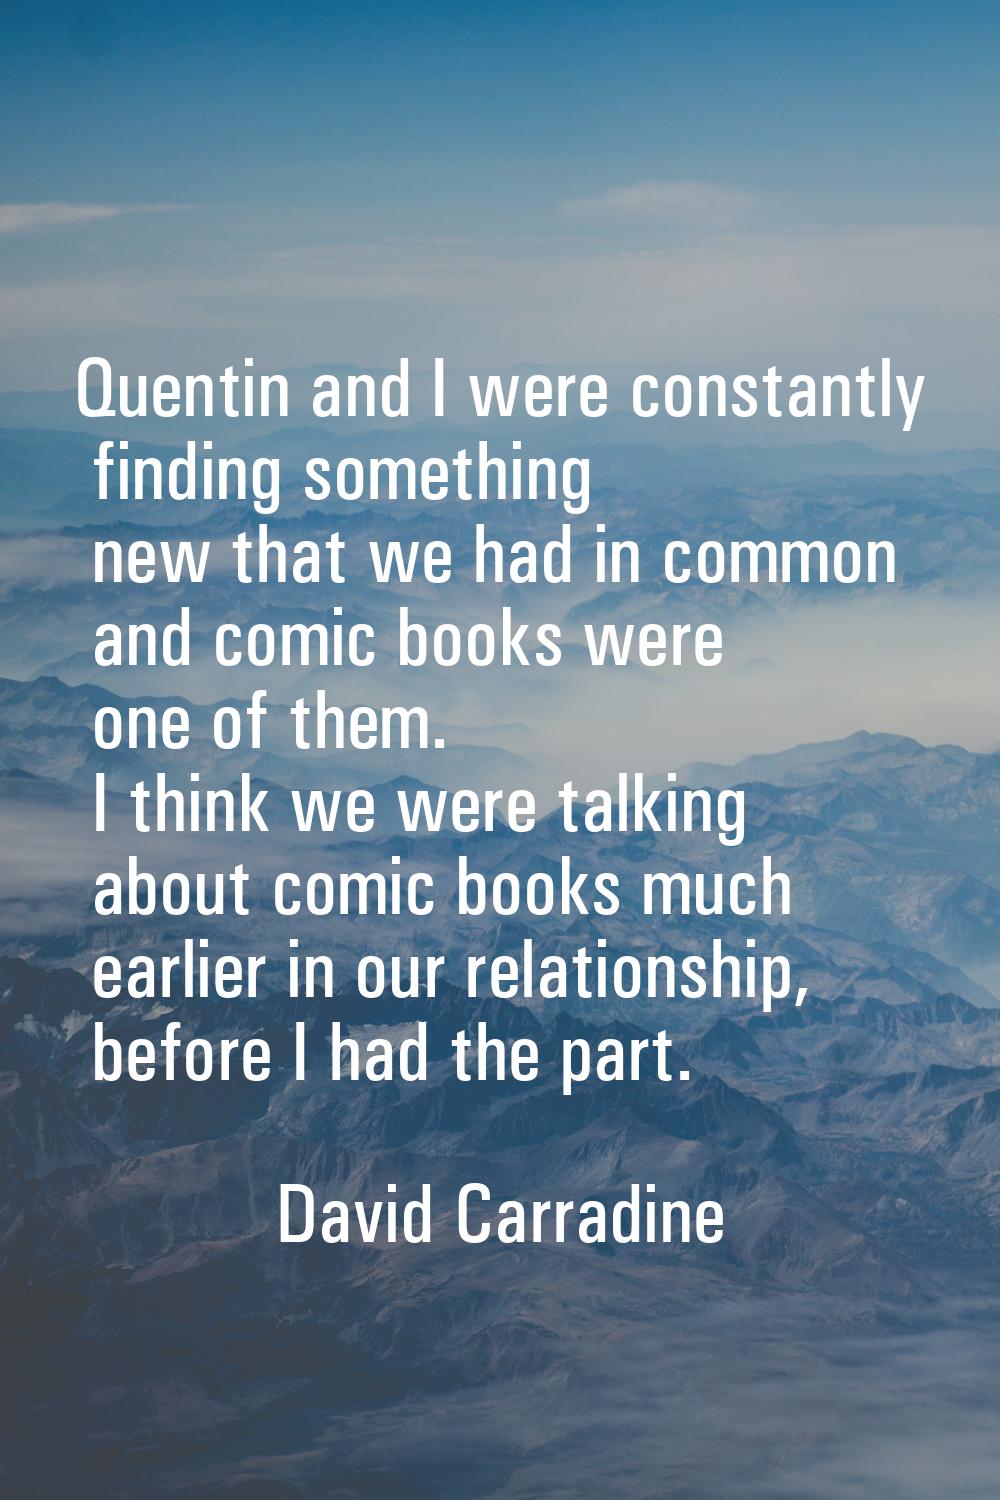 Quentin and I were constantly finding something new that we had in common and comic books were one 